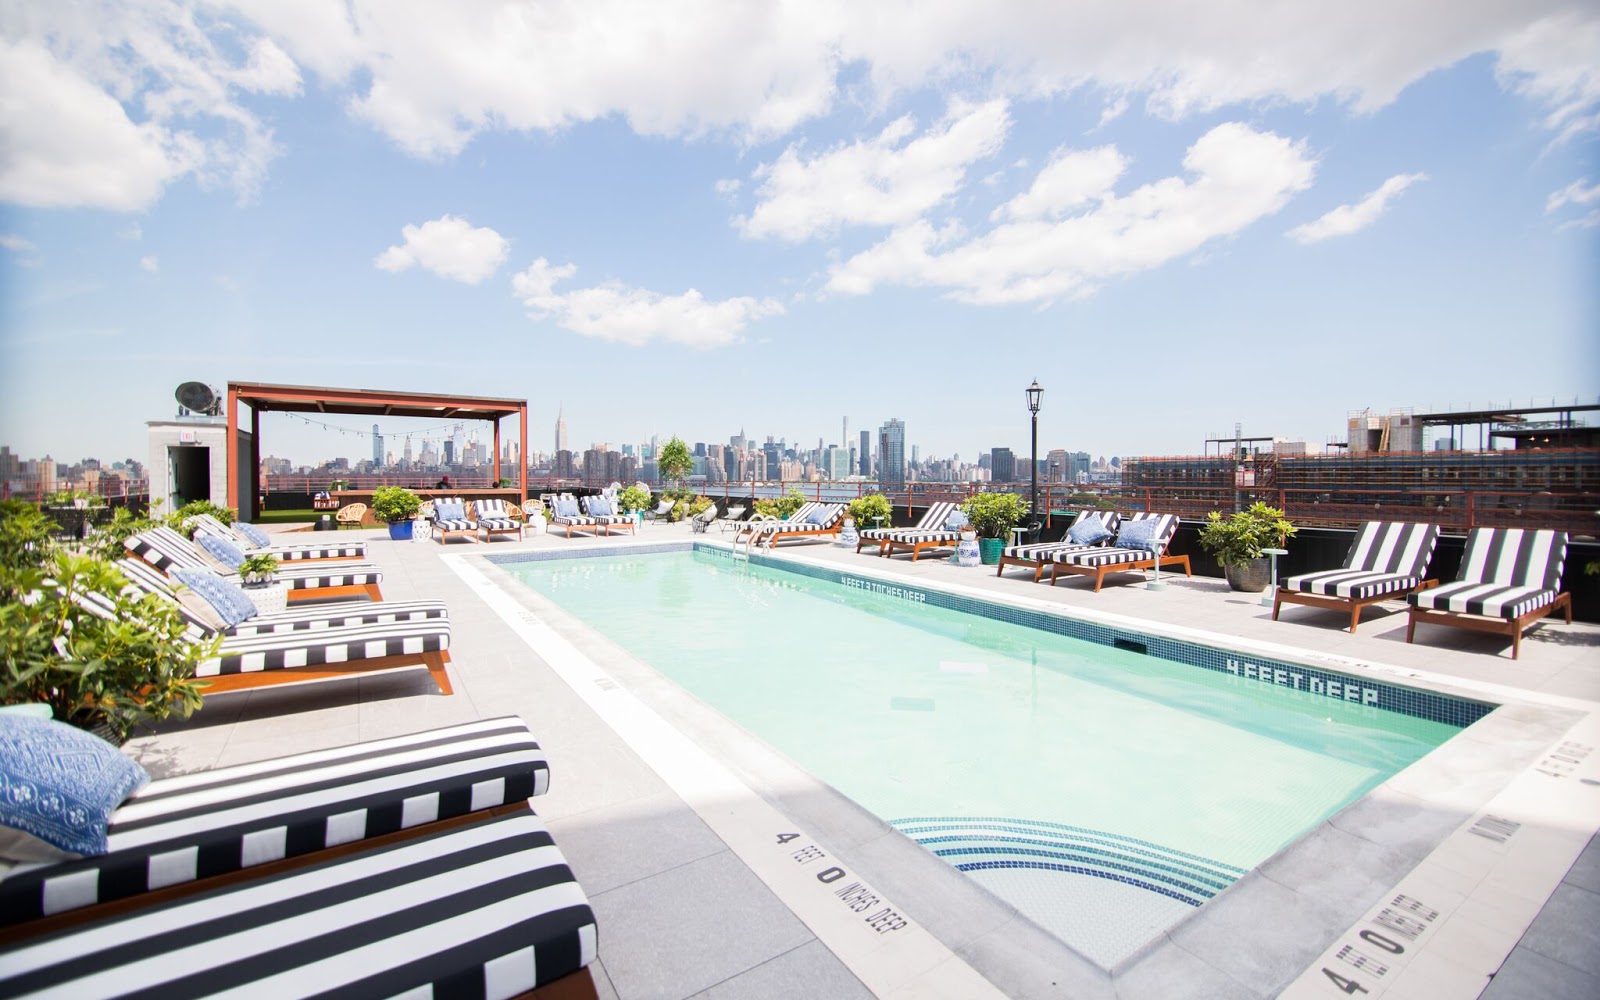 The Rooftop Pool & CBD Laced Cocktails Make The Williamsburg Hotel This Summer's Hottest Brooklyn Destination